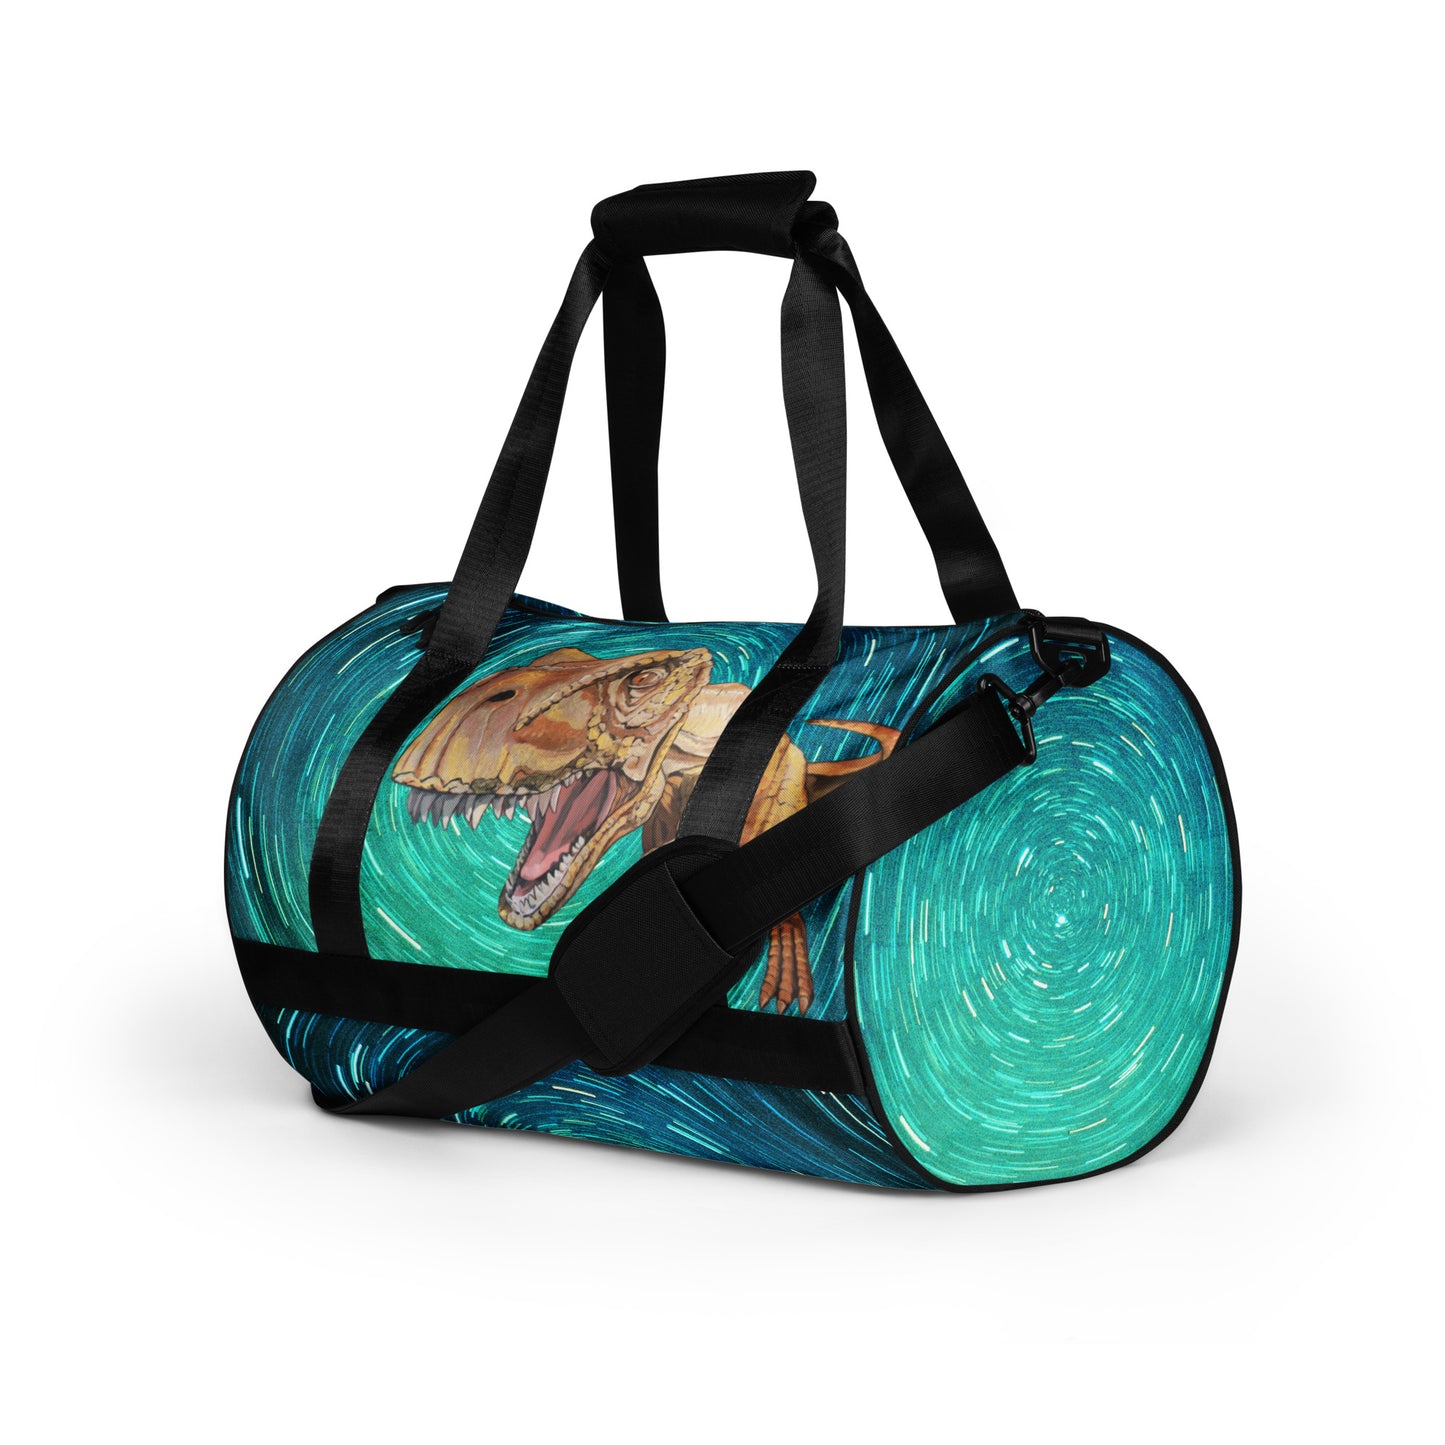 T- Rex in Gold Turquoise Night All-over print gym bag